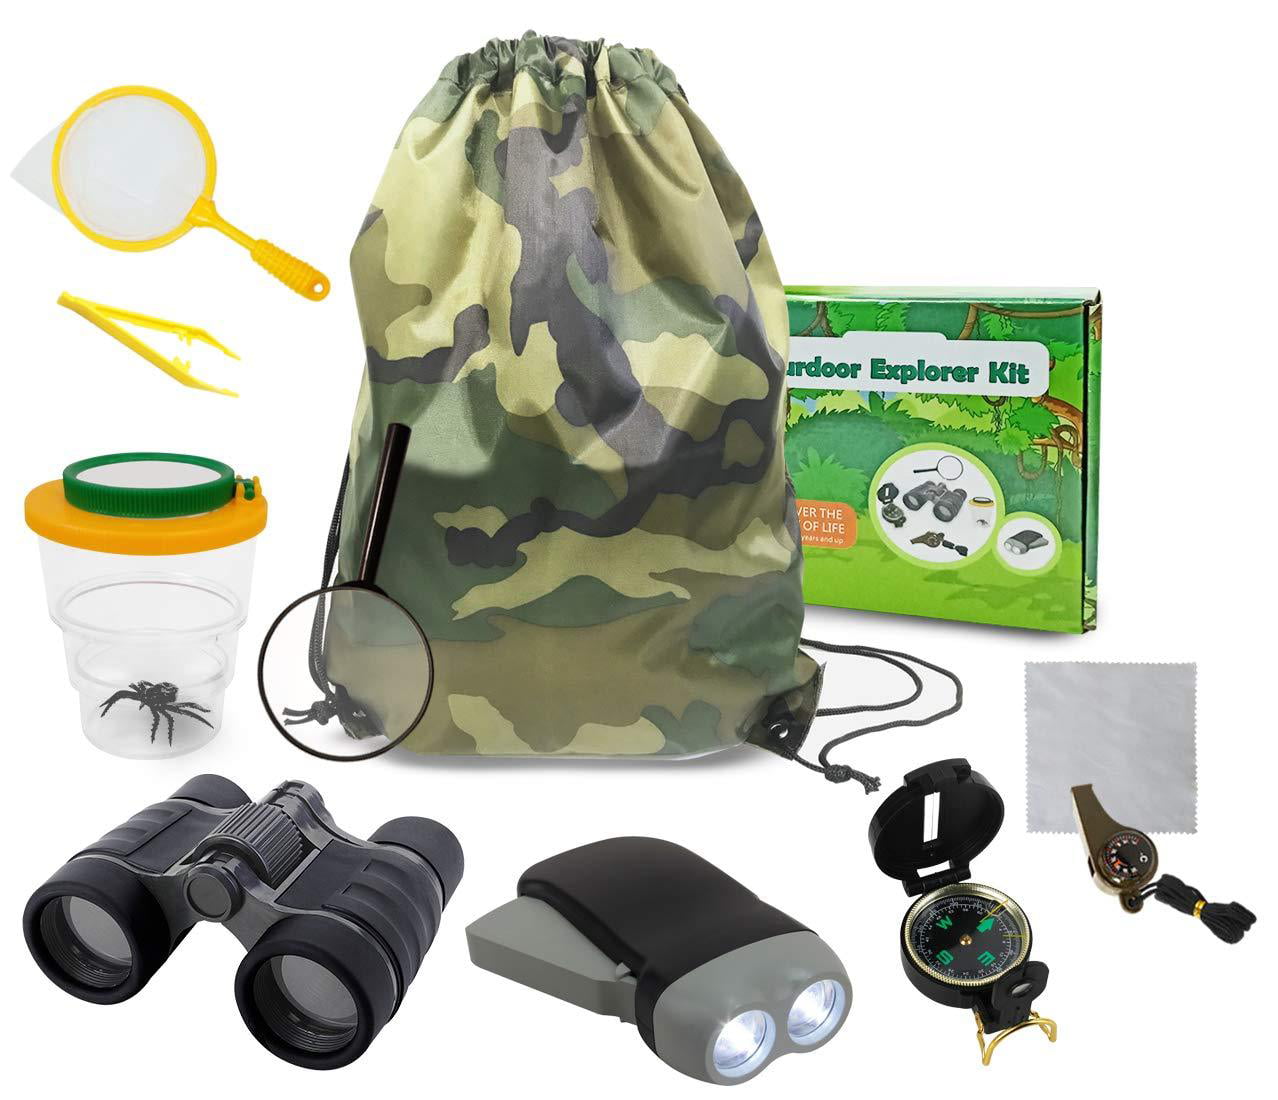 edola outdoor explorer kit gifts toys, 3-10 years old boys childrens ...